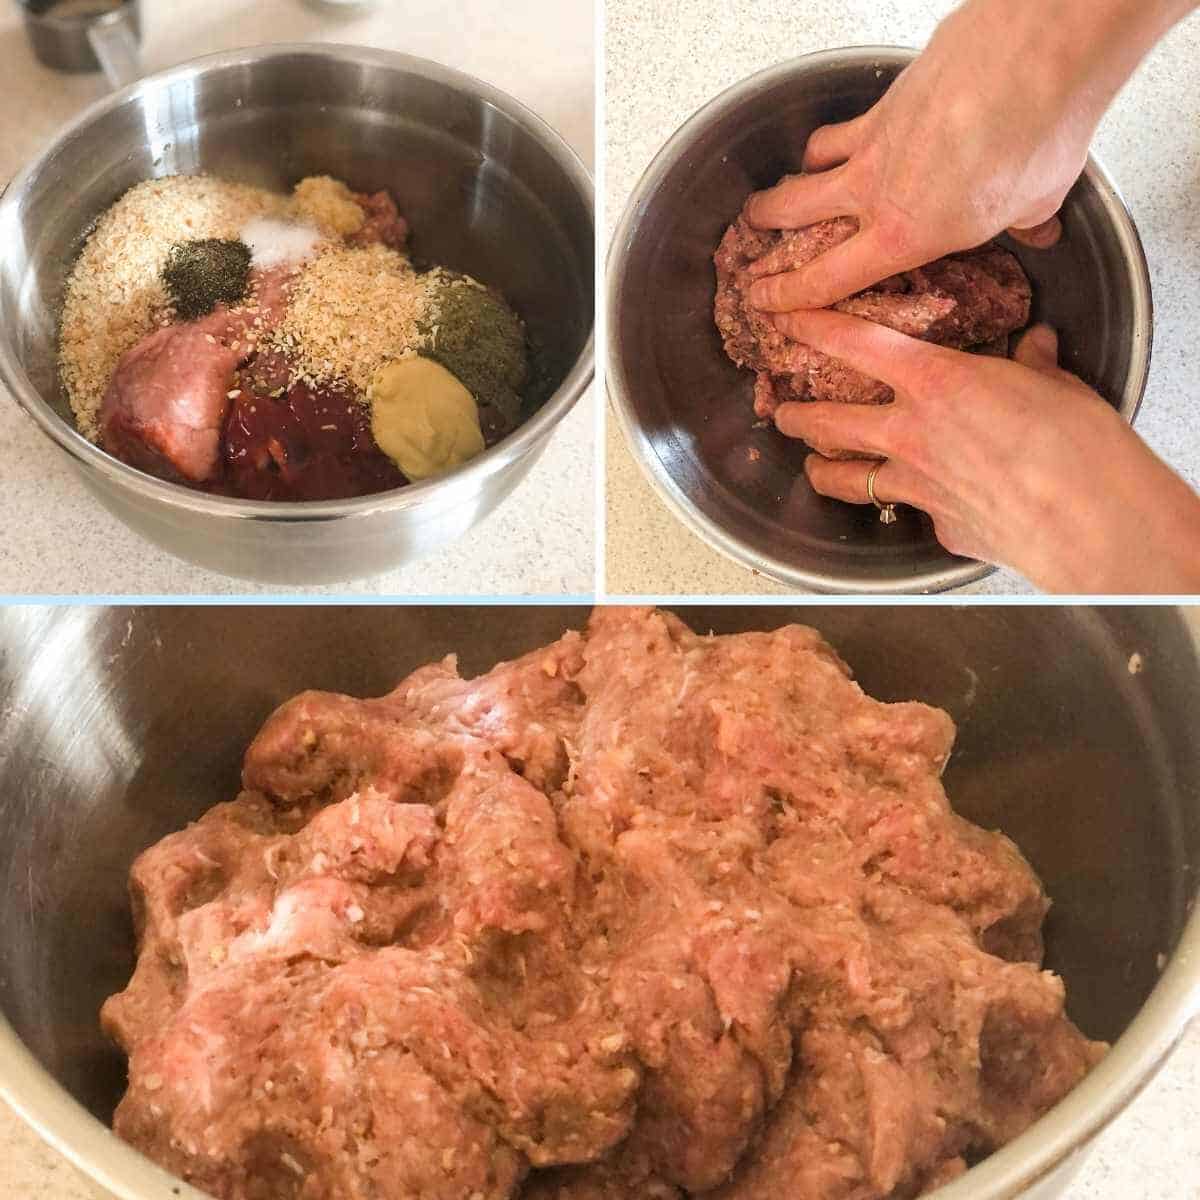 Three photos showing meatloaf ingredients, mixing with hands, and the mixture ready to bake.